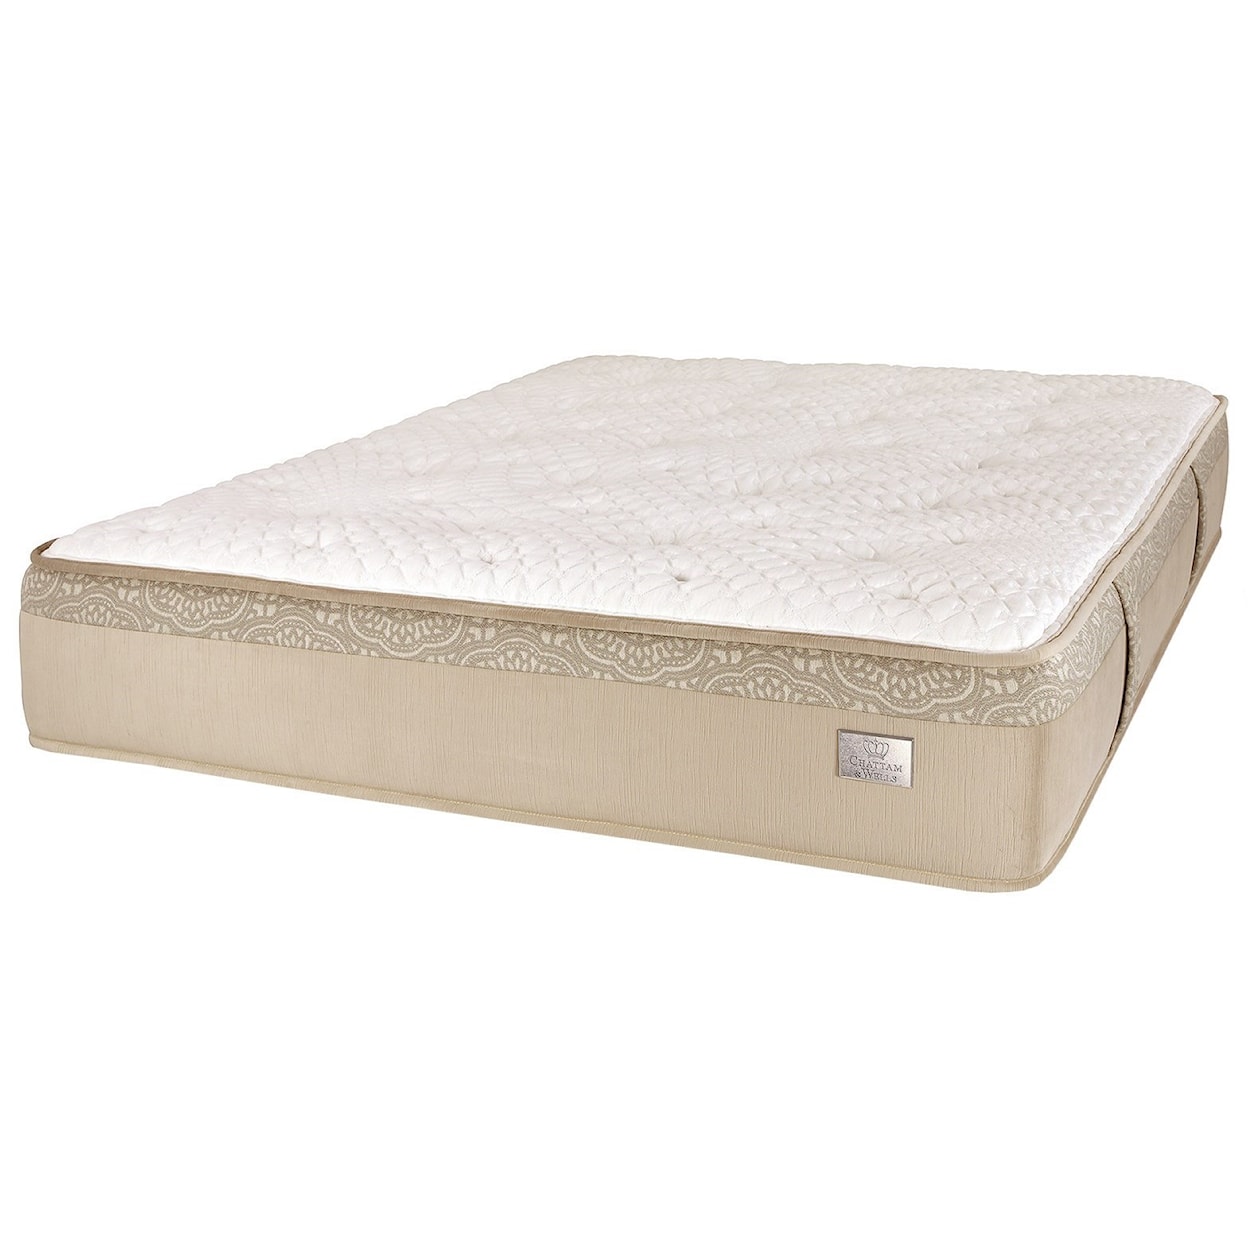 Spring Air Showstopper Firm Twin XL Pocketed Coil Mattress